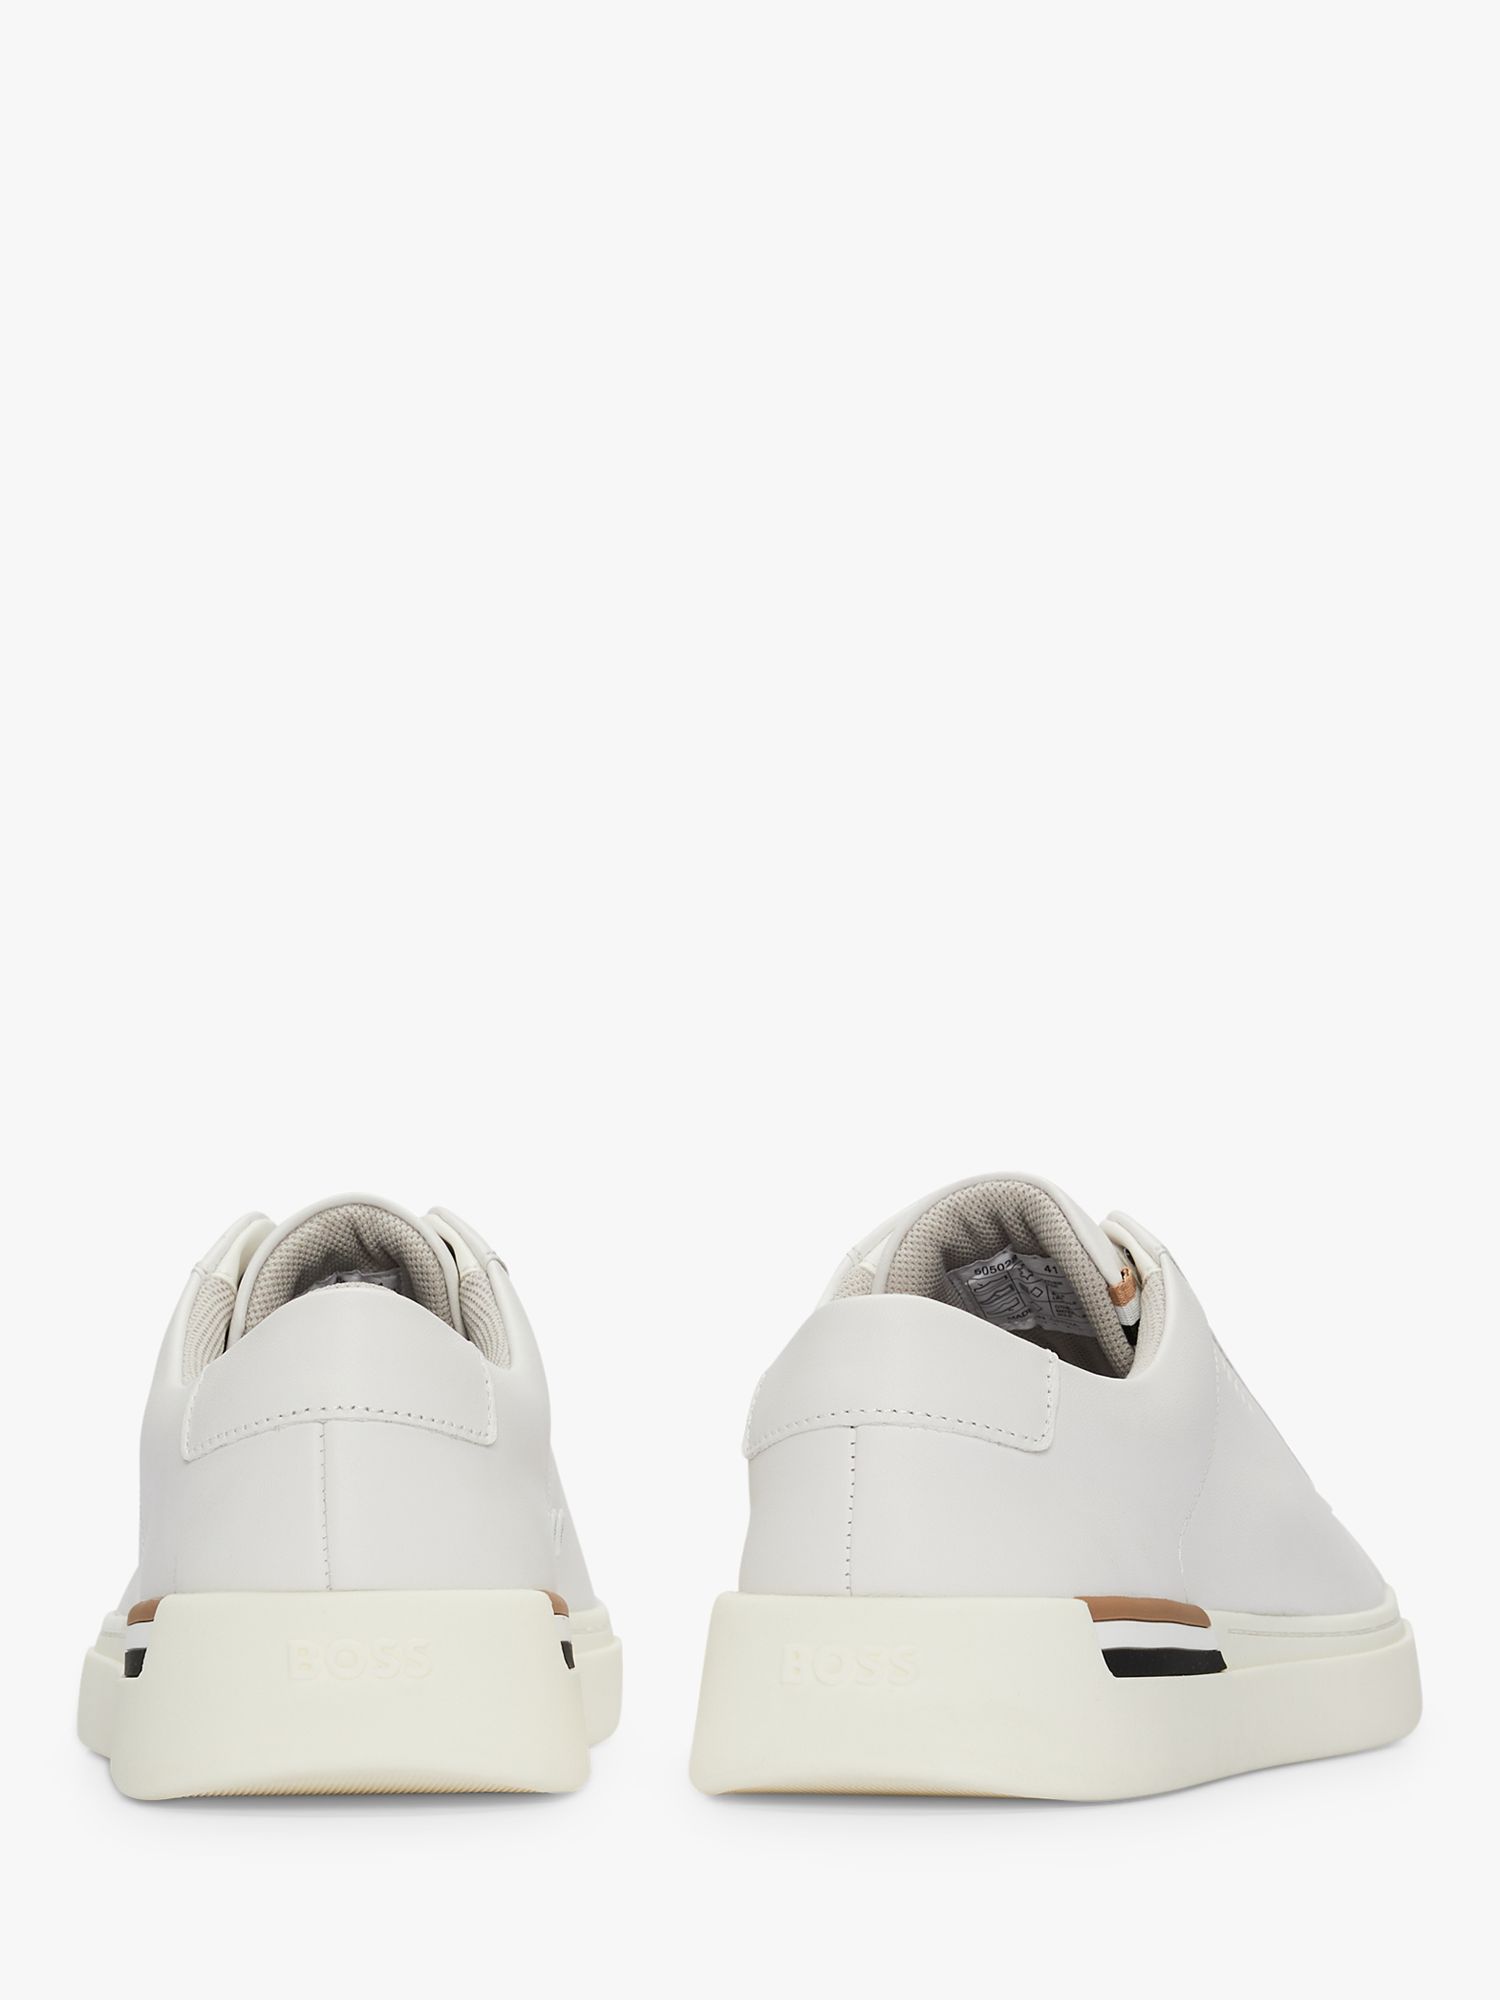 BOSS Clint Lace Up Trainers, White at John Lewis & Partners